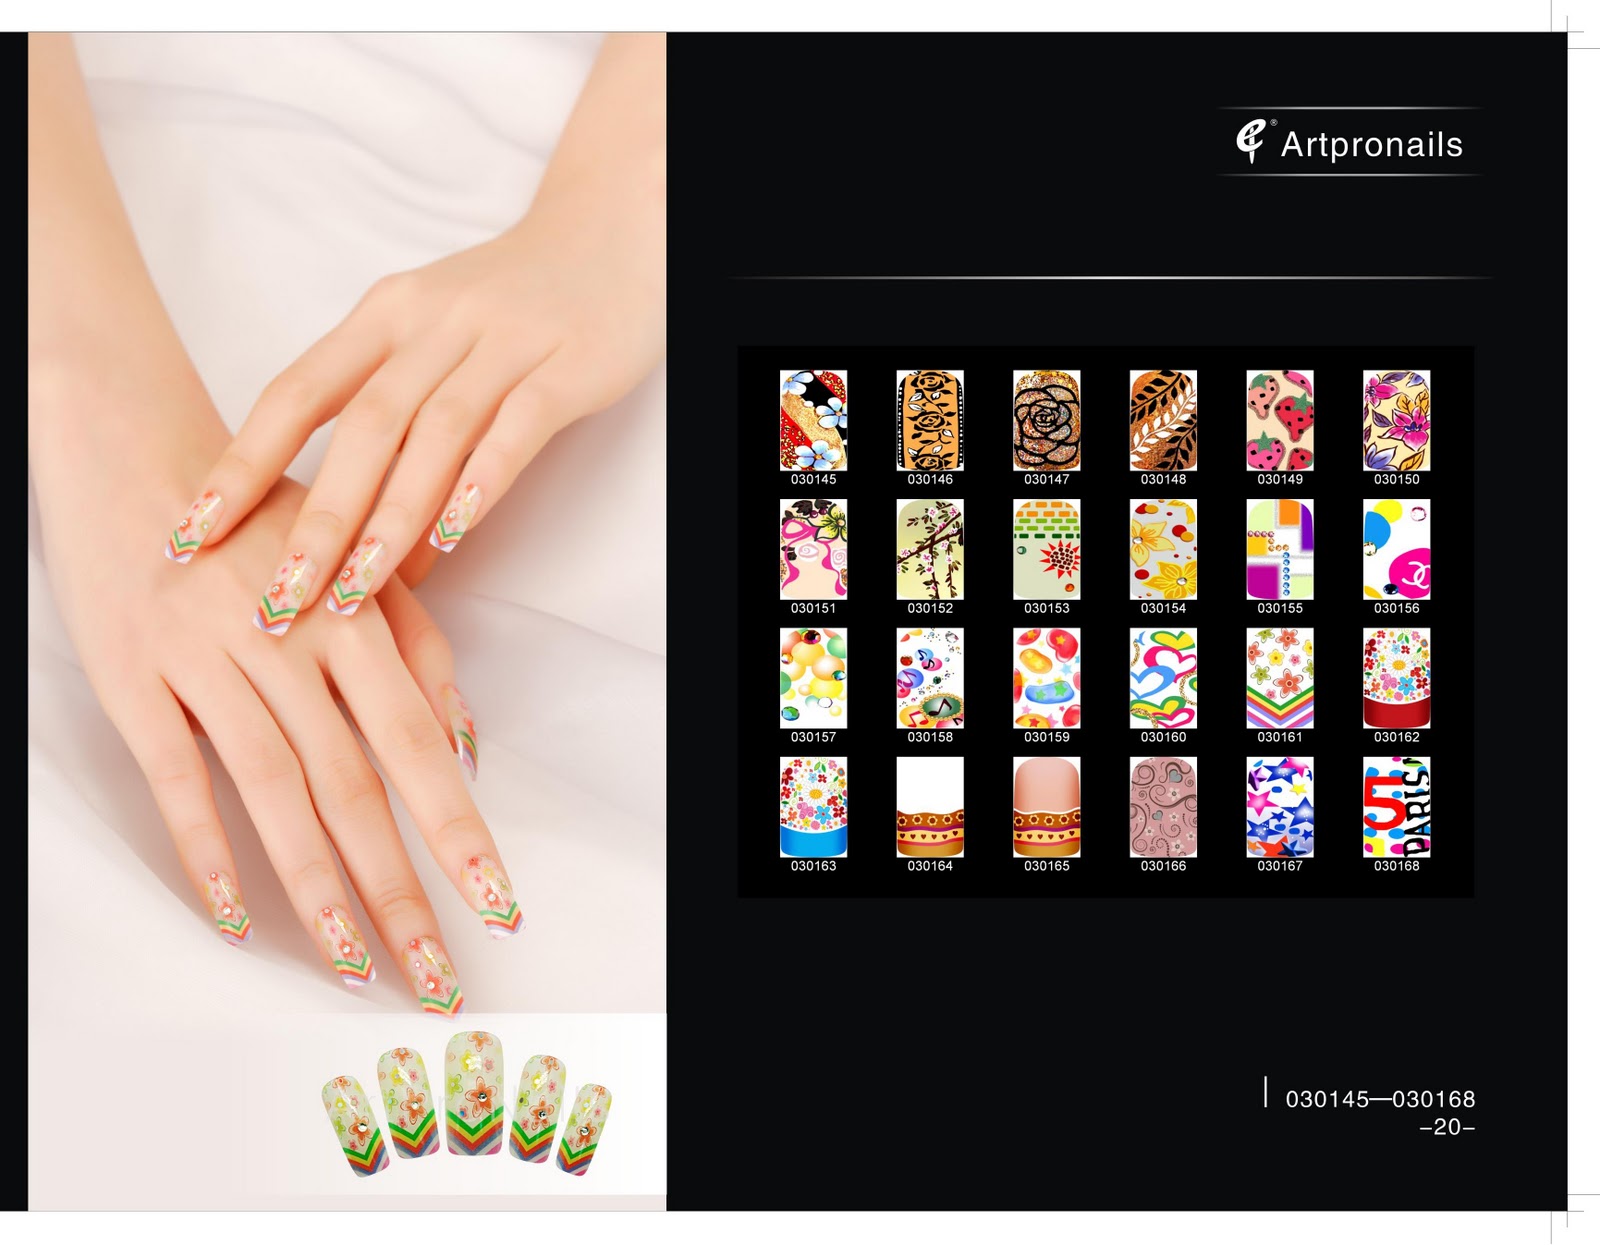 3. Nail Art Catalogs for Inspiration - wide 5